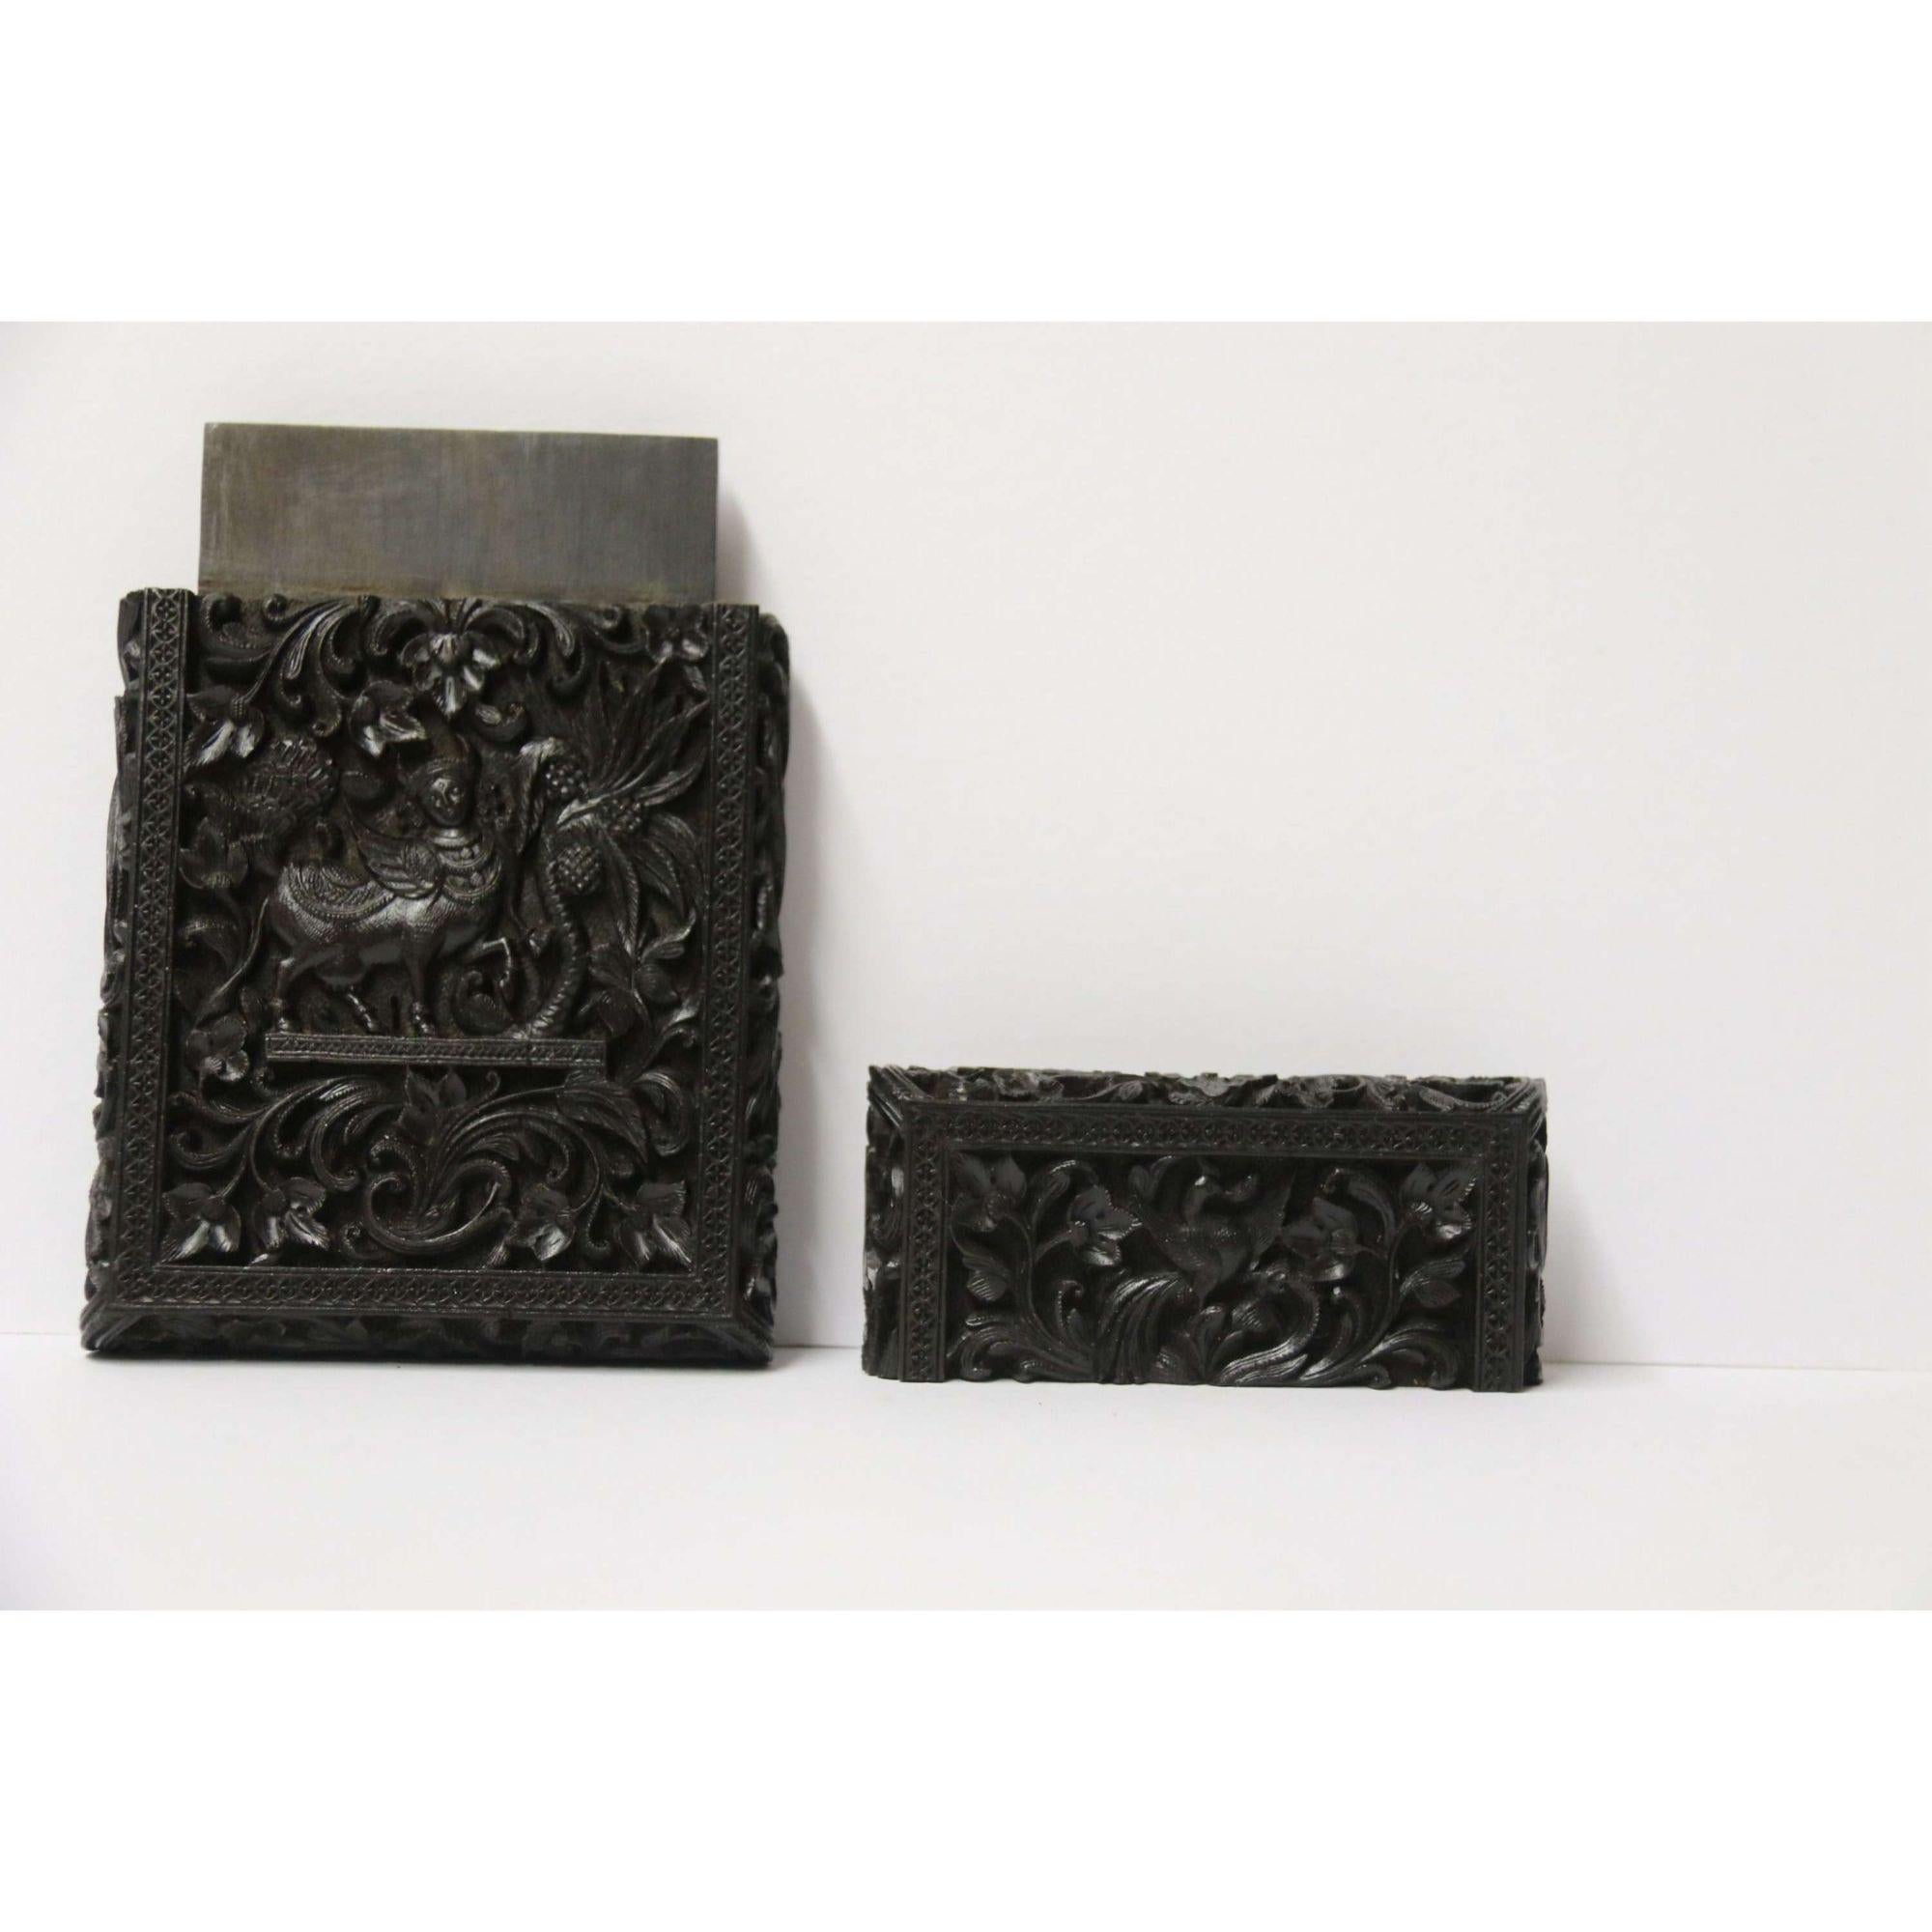 19th Century Exceptional Indian Raj Period Carved Ebony Calling Card Case